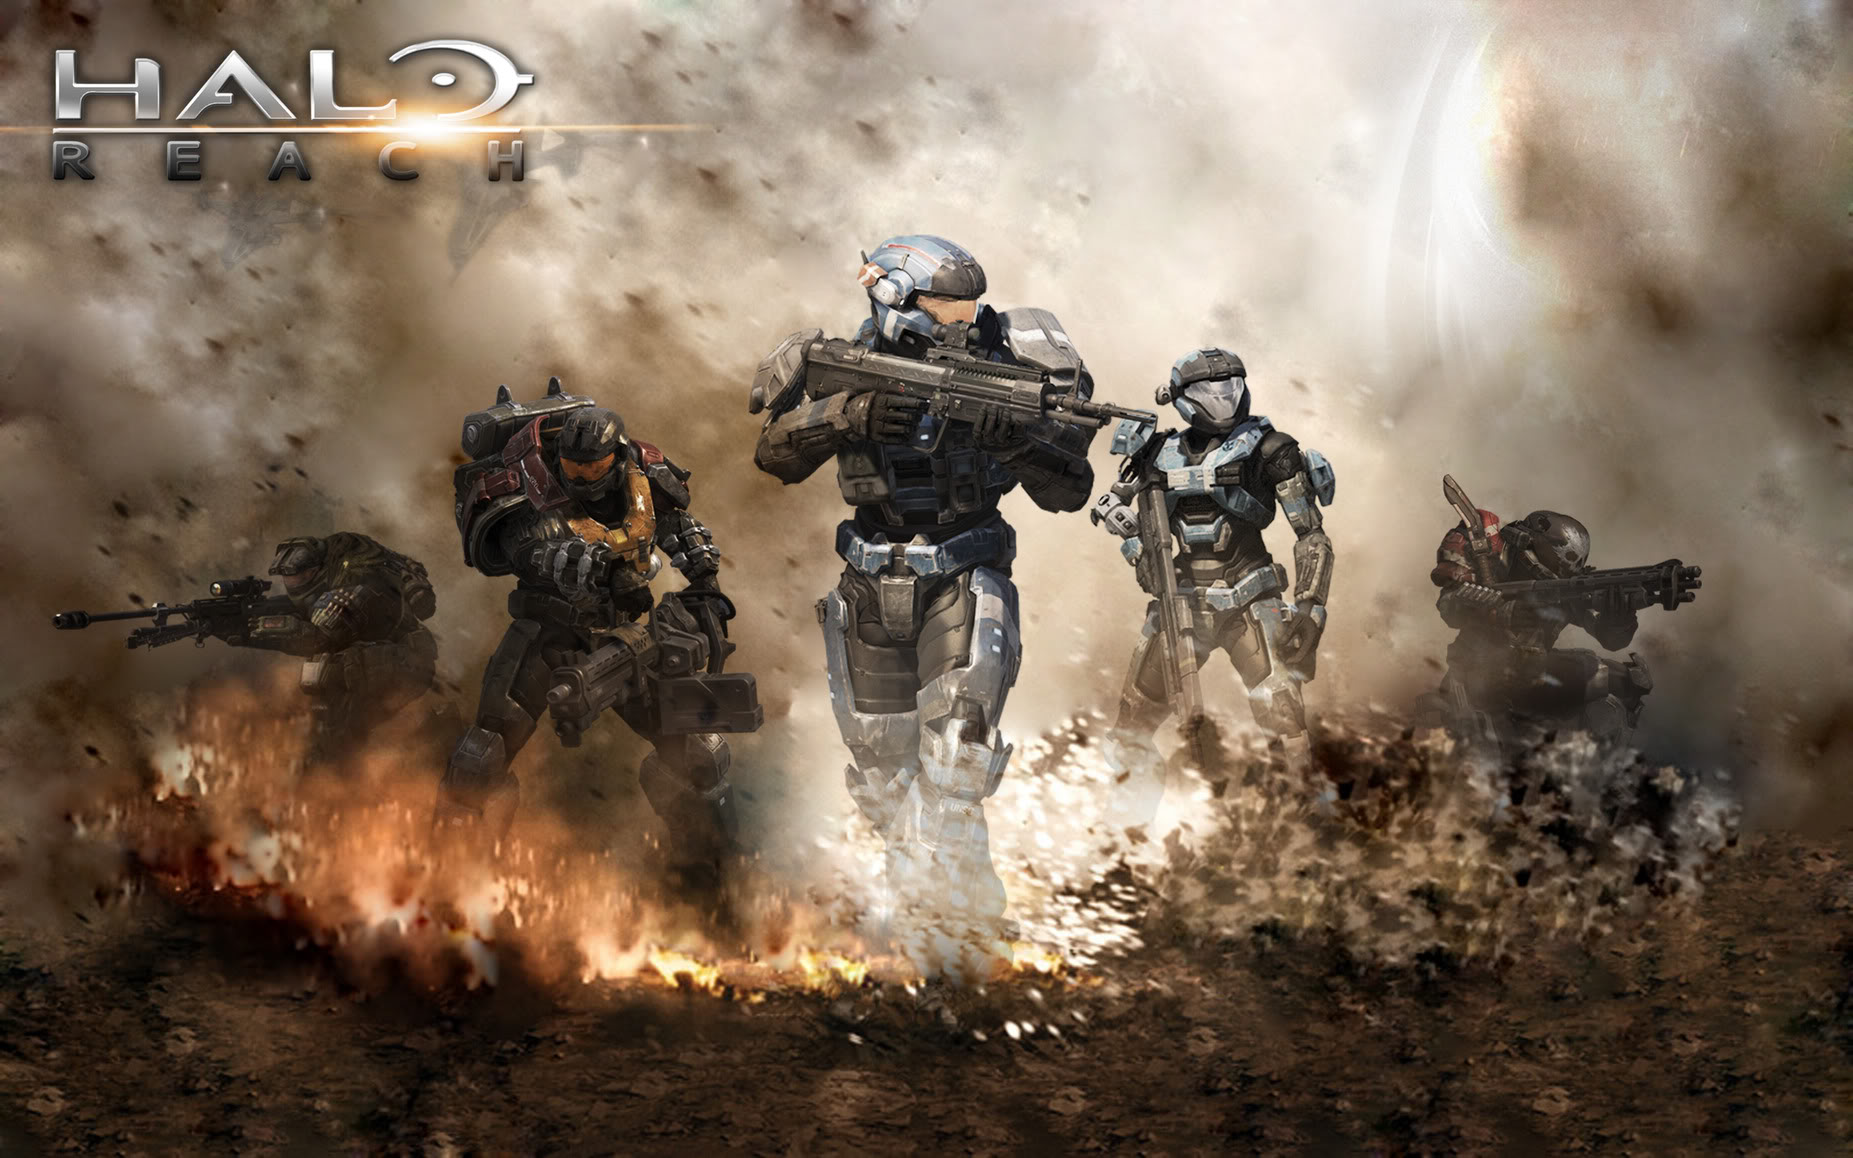 All About Halo Wallpaper